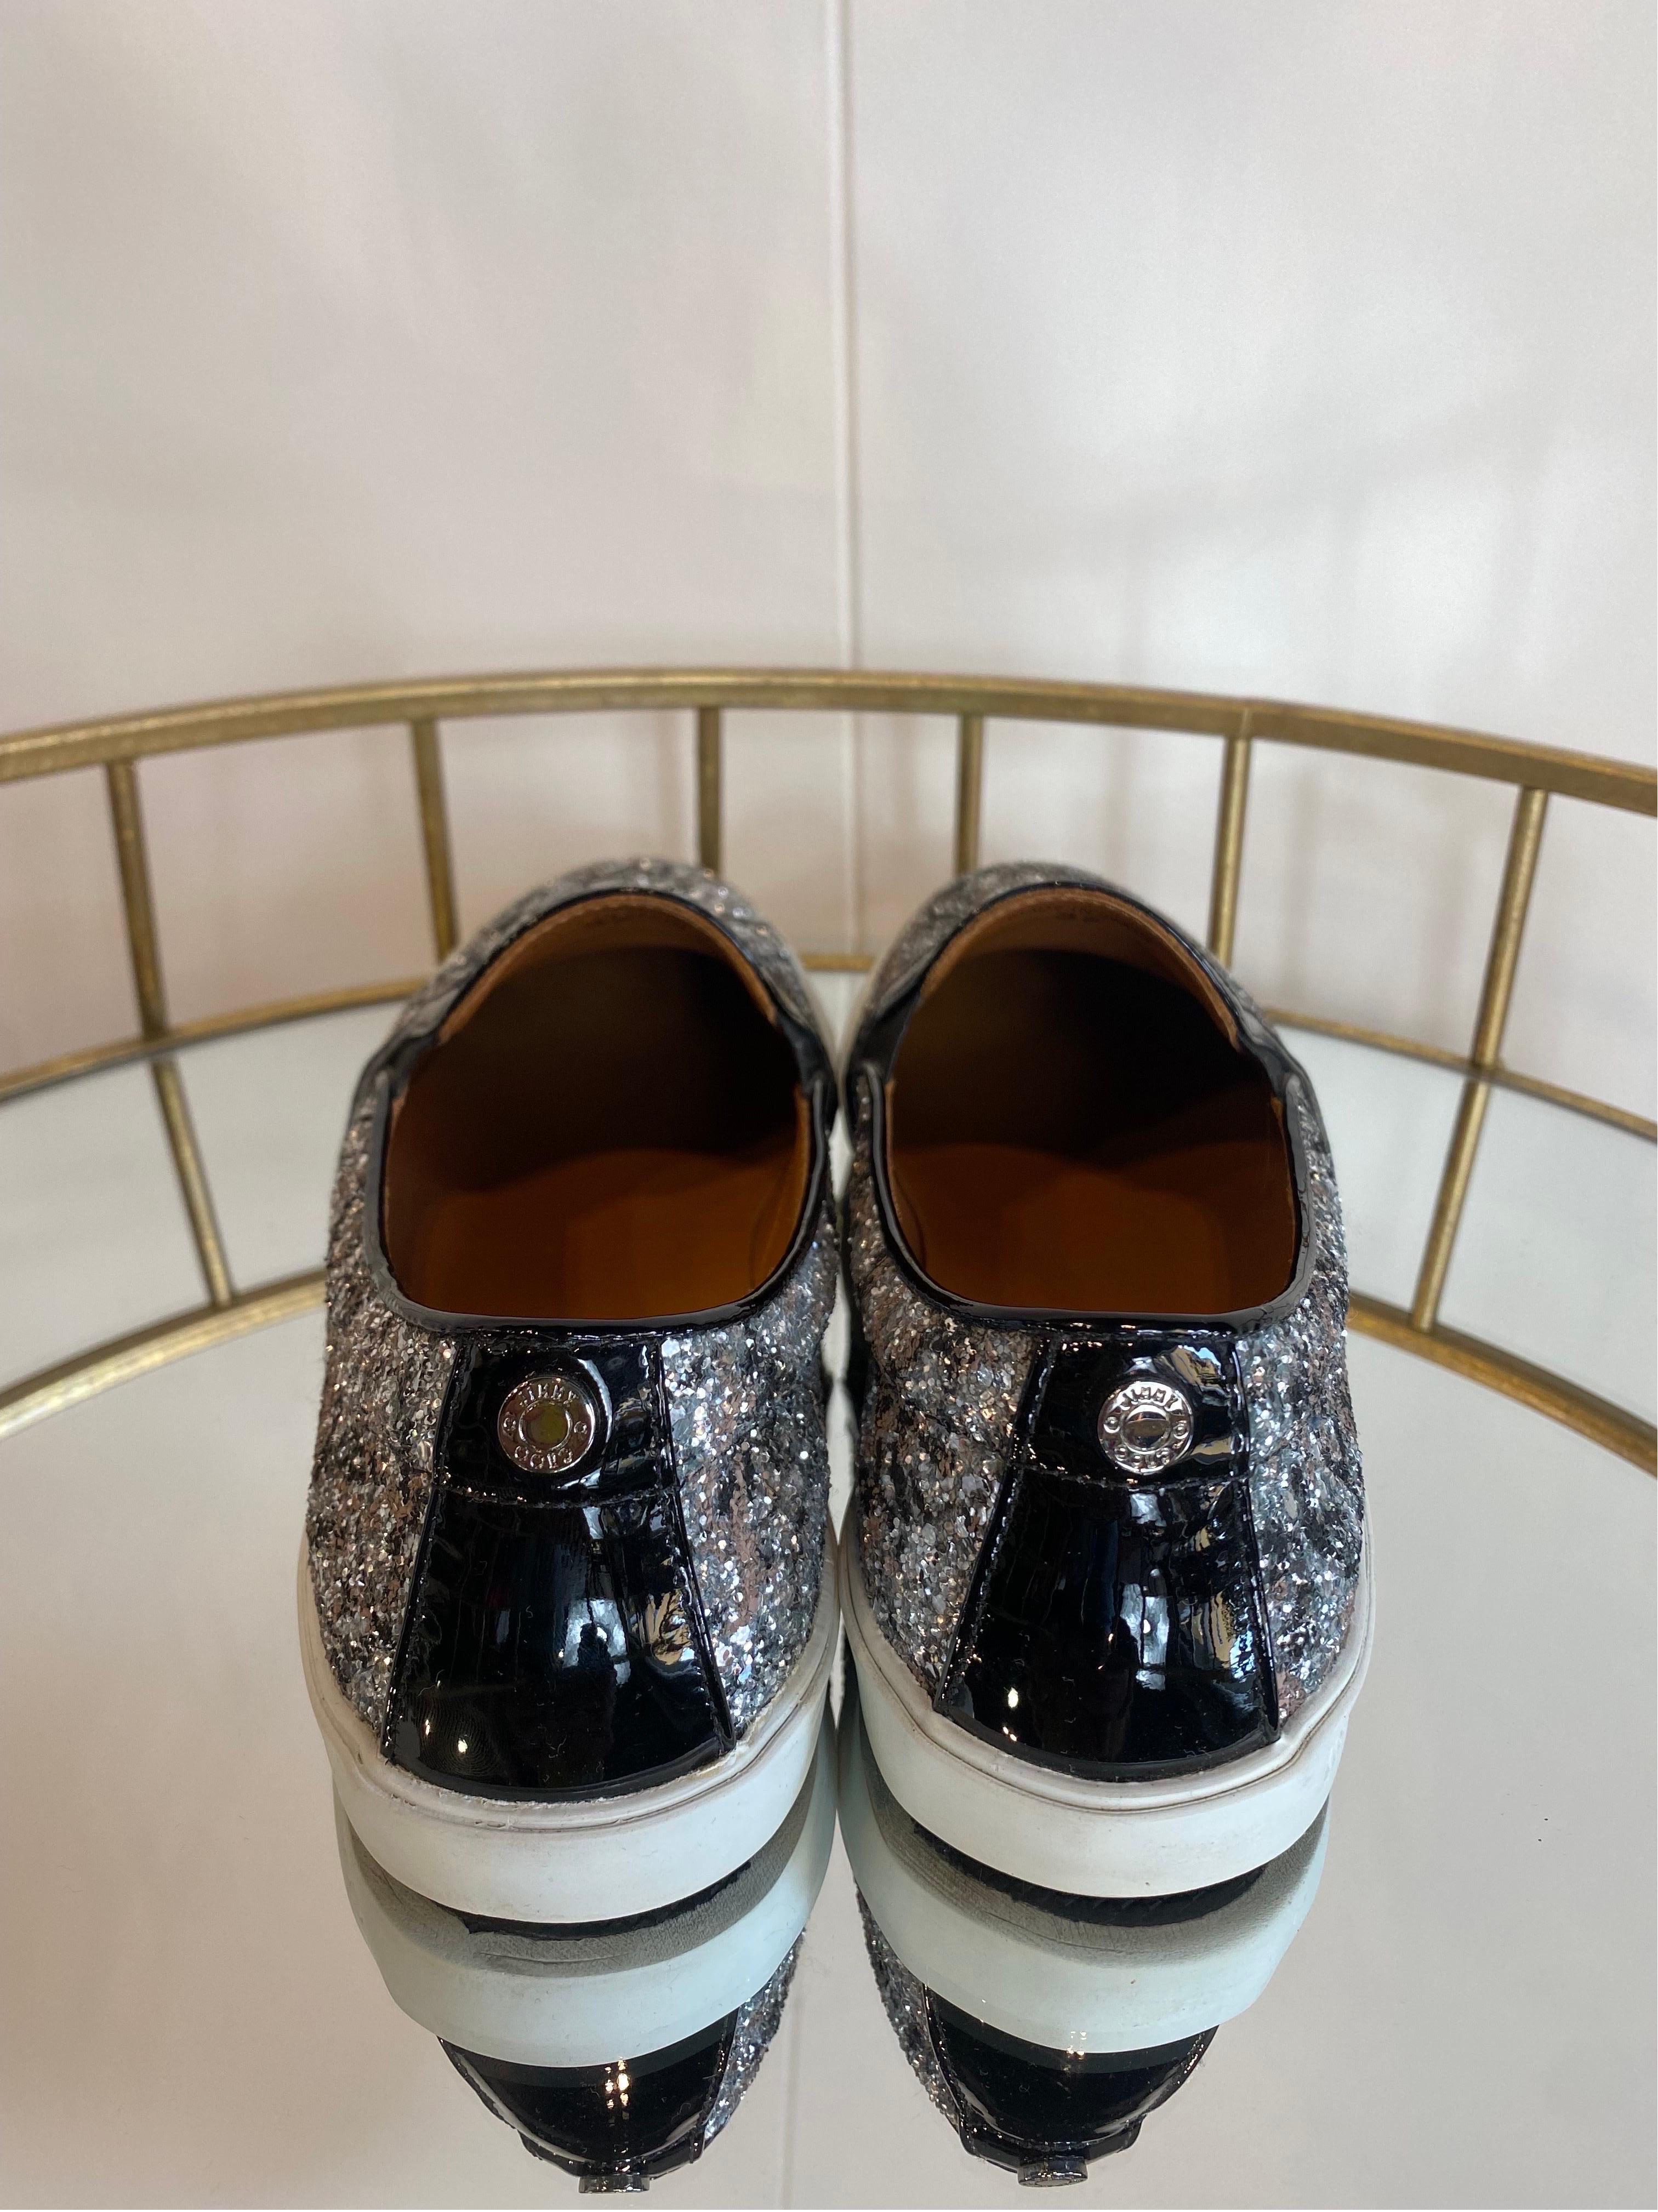 Slip on Jimmy Choo paillettes
Number 37 EU.
Black parts in black patent leather and all-over silver sequins.
In excellent condition, shows signs of normal use.
With original dust.
Sole 25cm
Platform 2cm.